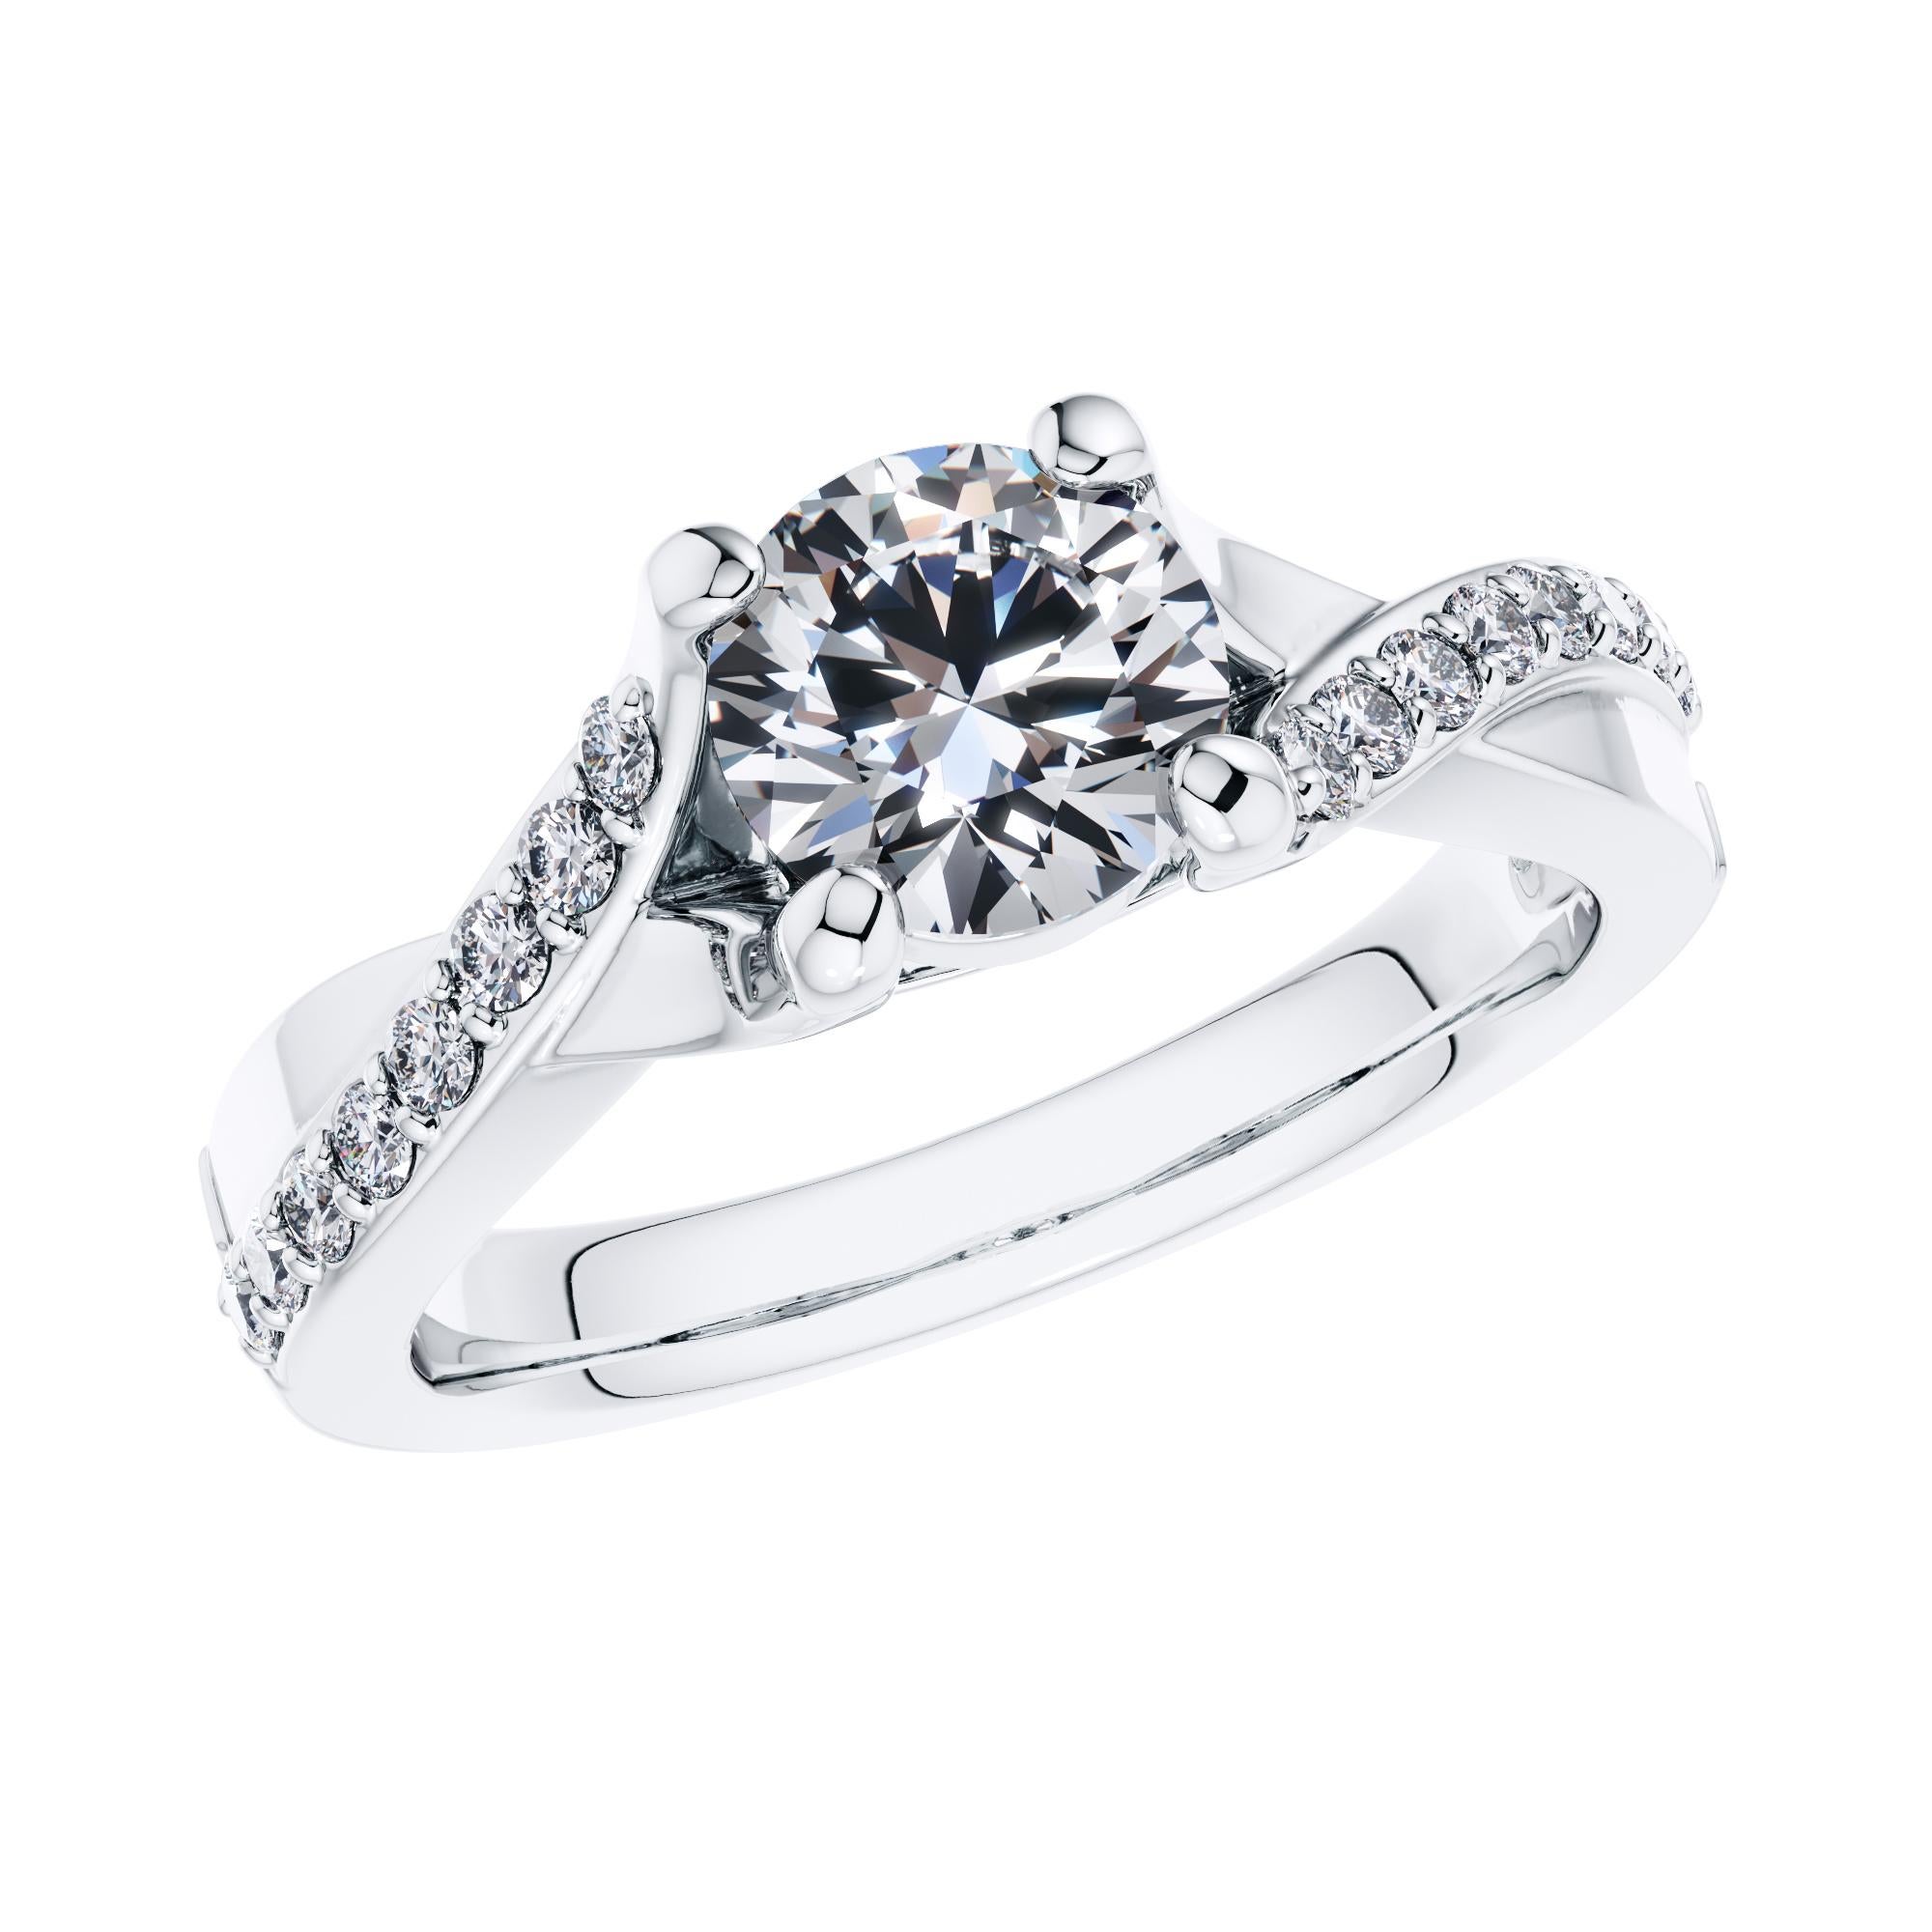 For a beautifully entwined journey together, this gleaming twisted vine modern classic engagement ring. Handmade in high grade Platinum 950 to British Standard, with a total of 0.68 Carat White Diamonds. Set in an open gallery 4 prong mount with a